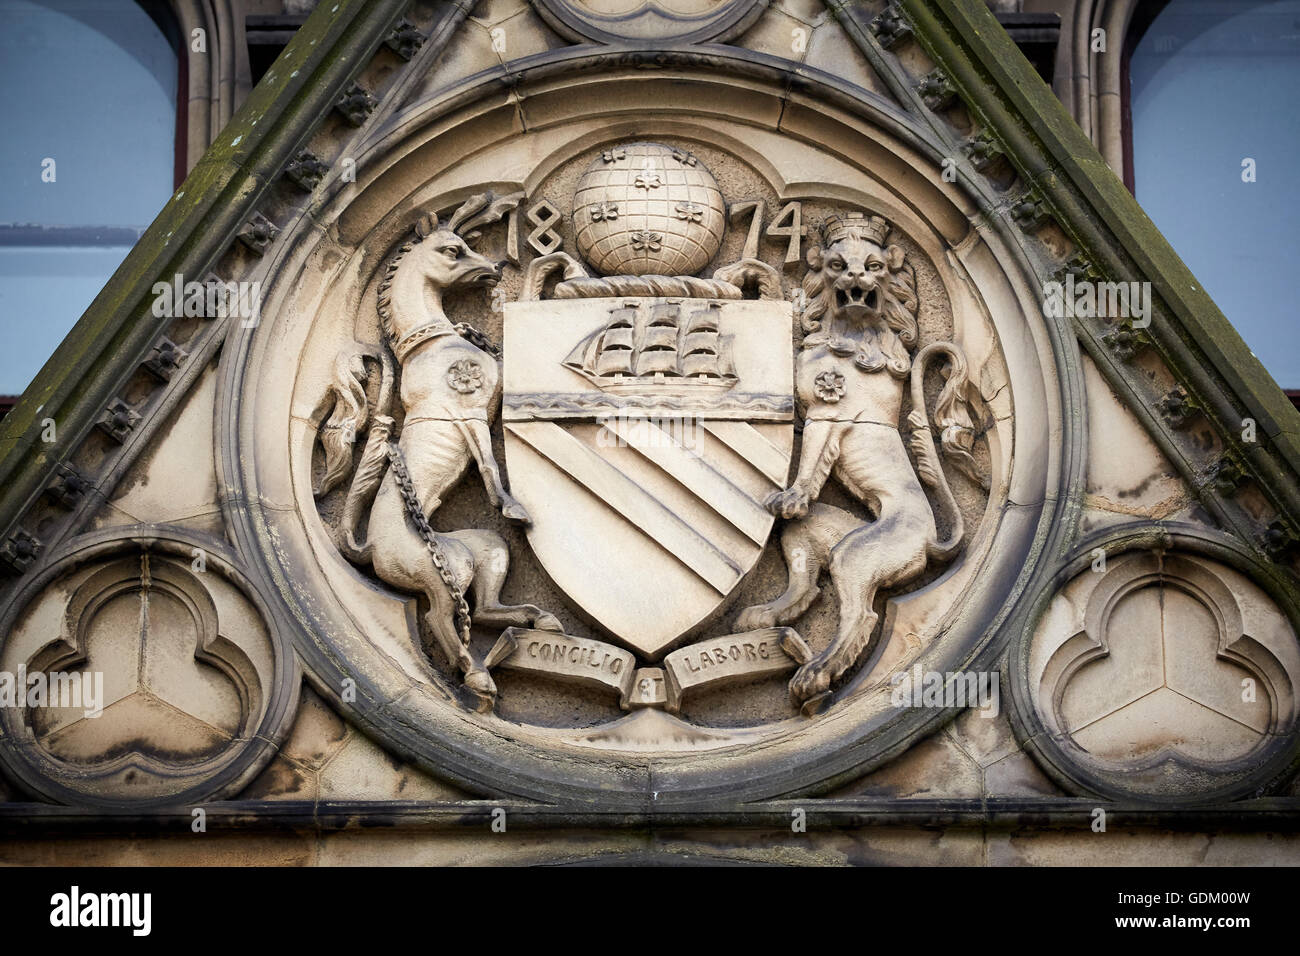 Manchester coat of arms   Sandstone carving stone mason work on Manchester Town Hall exterior detail Stock Photo